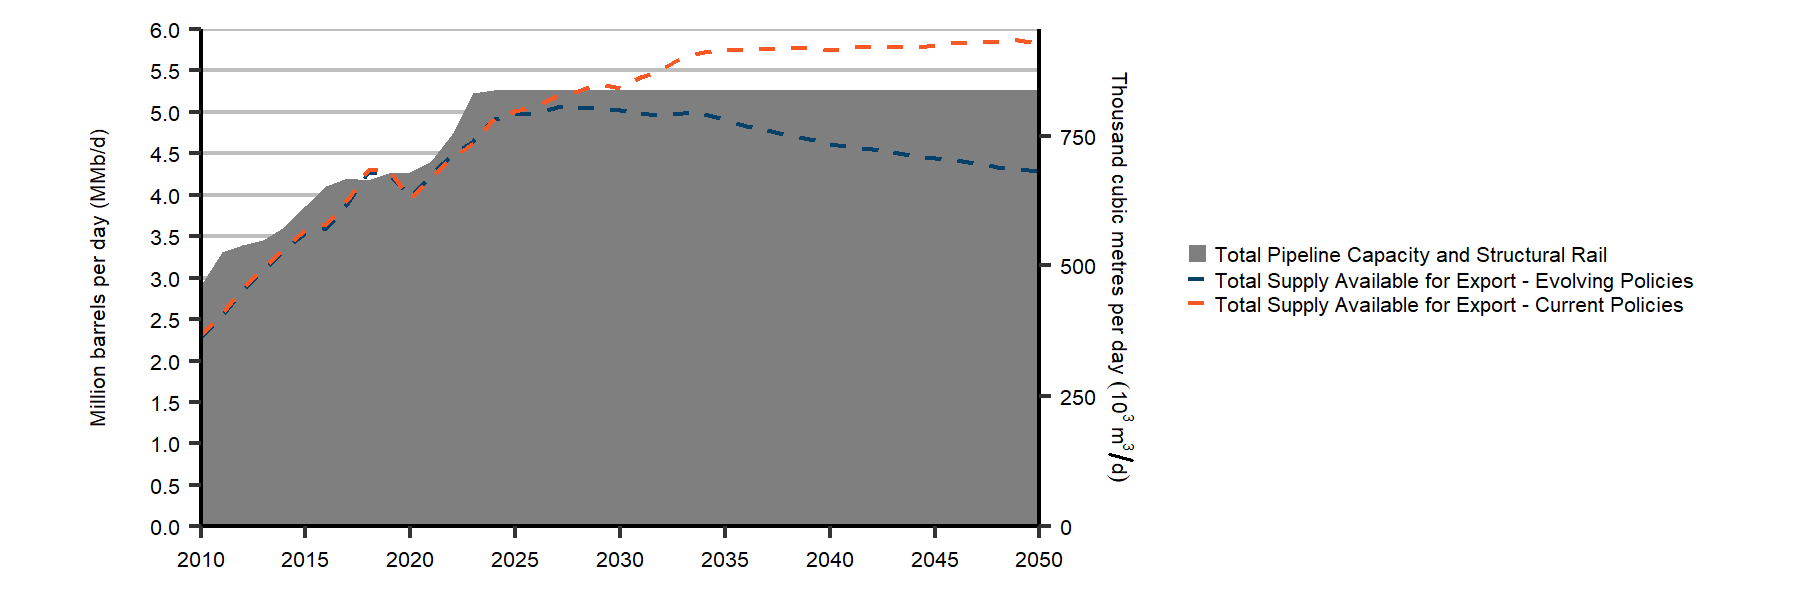 Illustrative Export Capacity from Pipelines and Structural Rail, vs. Total Crude Oil Supply Available from the Western Canadian Sedimentary Basin (WCSB), Evolving and Current Policies Scenarios